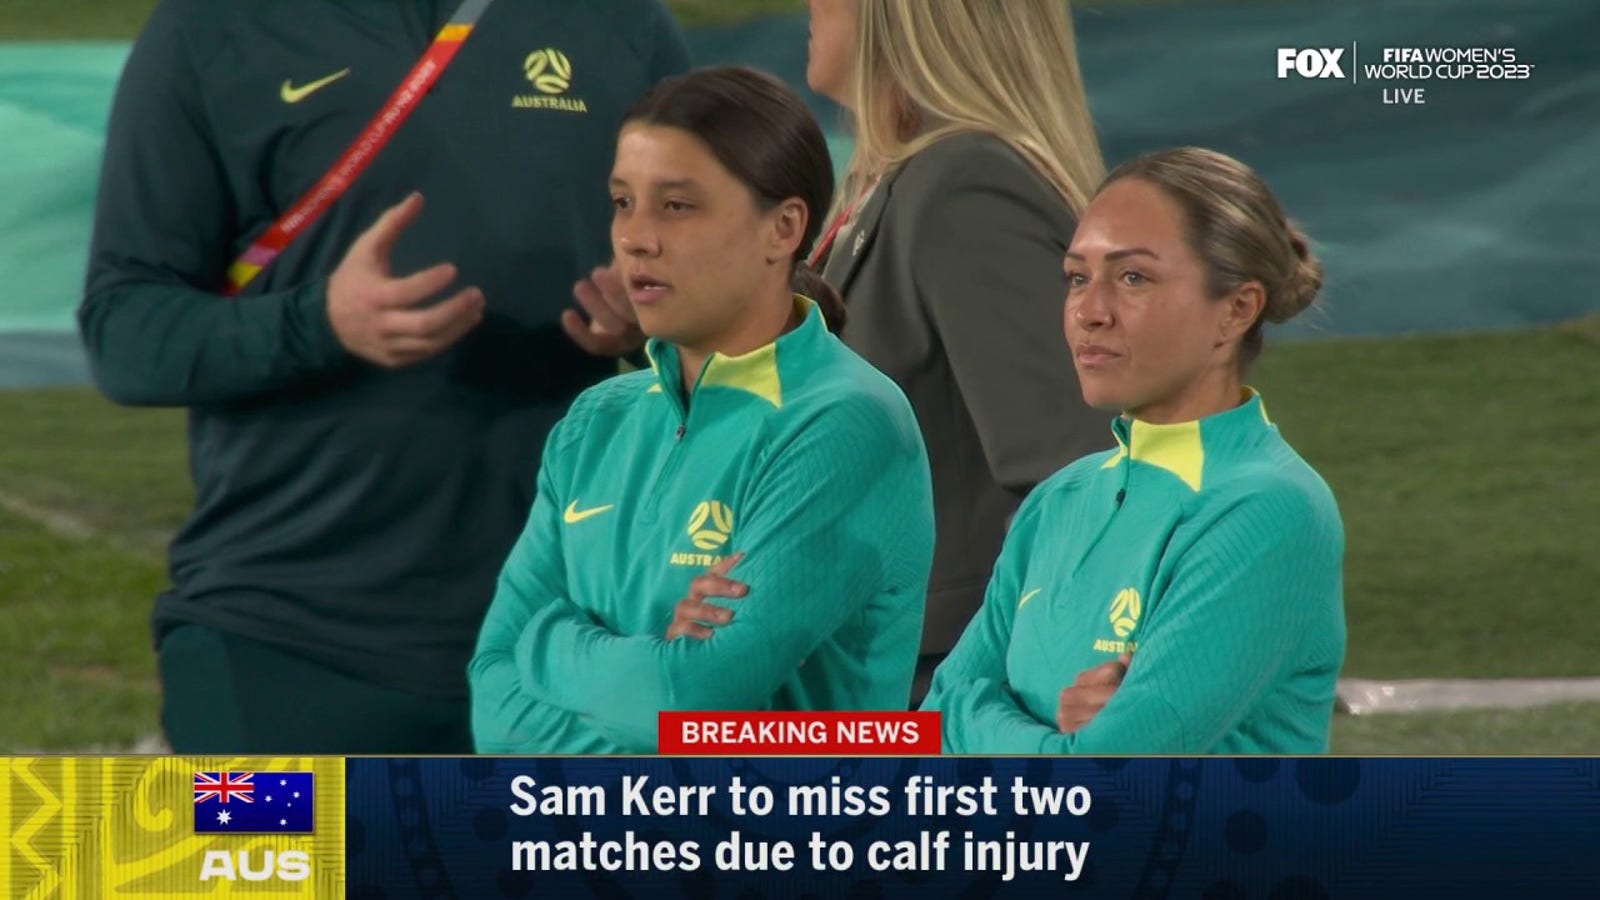 "World Cup Tonight" crew reacts to Sam Kerr's injury